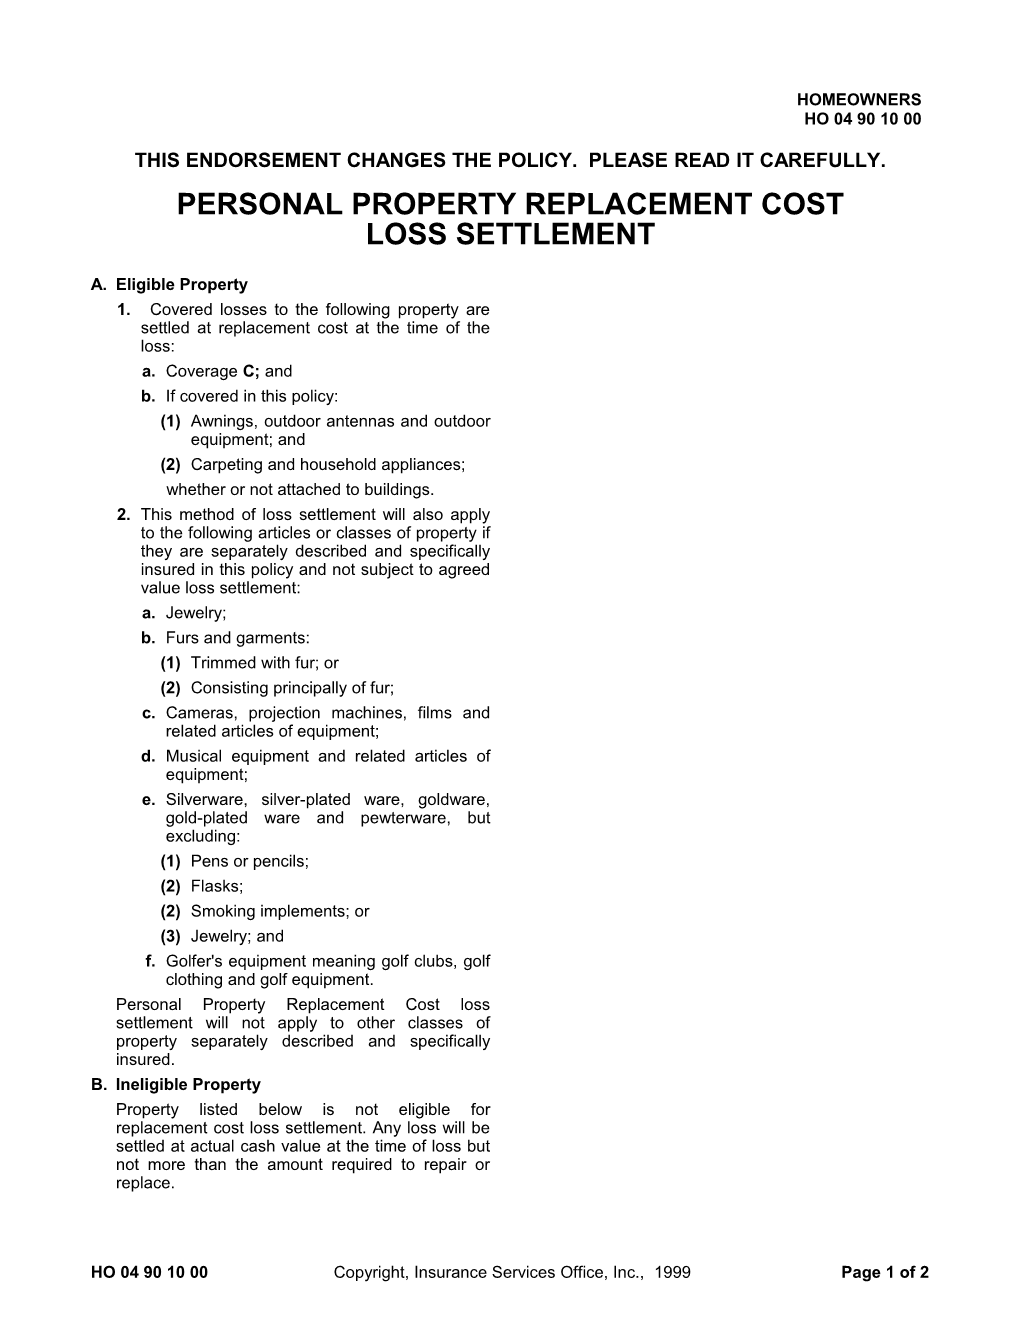 Personal Property Replacement Cost